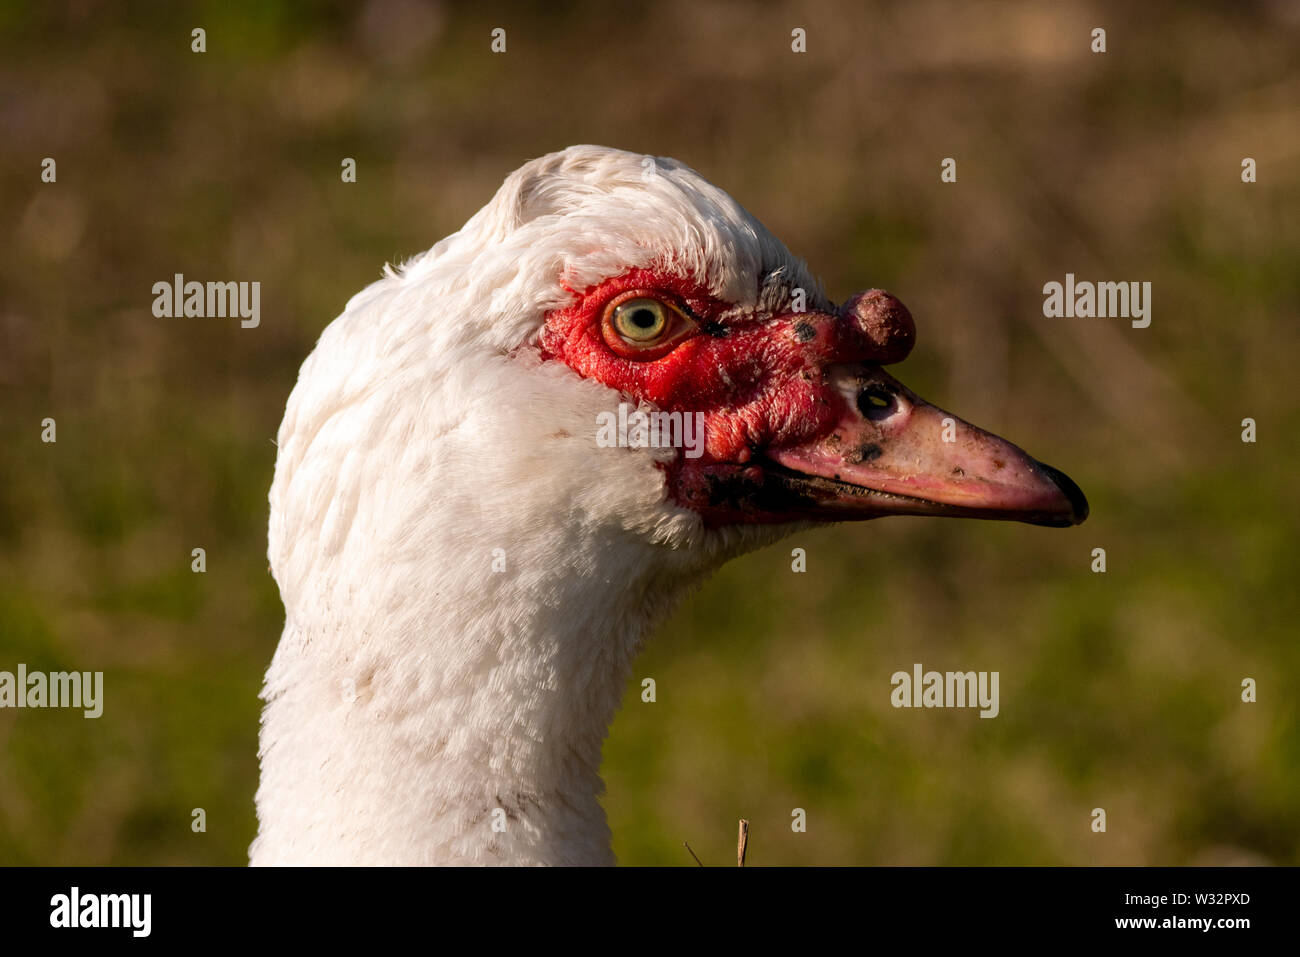 Detail of the head of a Creole duck. Scientific name Cairina moschata momelanotus. Stock Photo